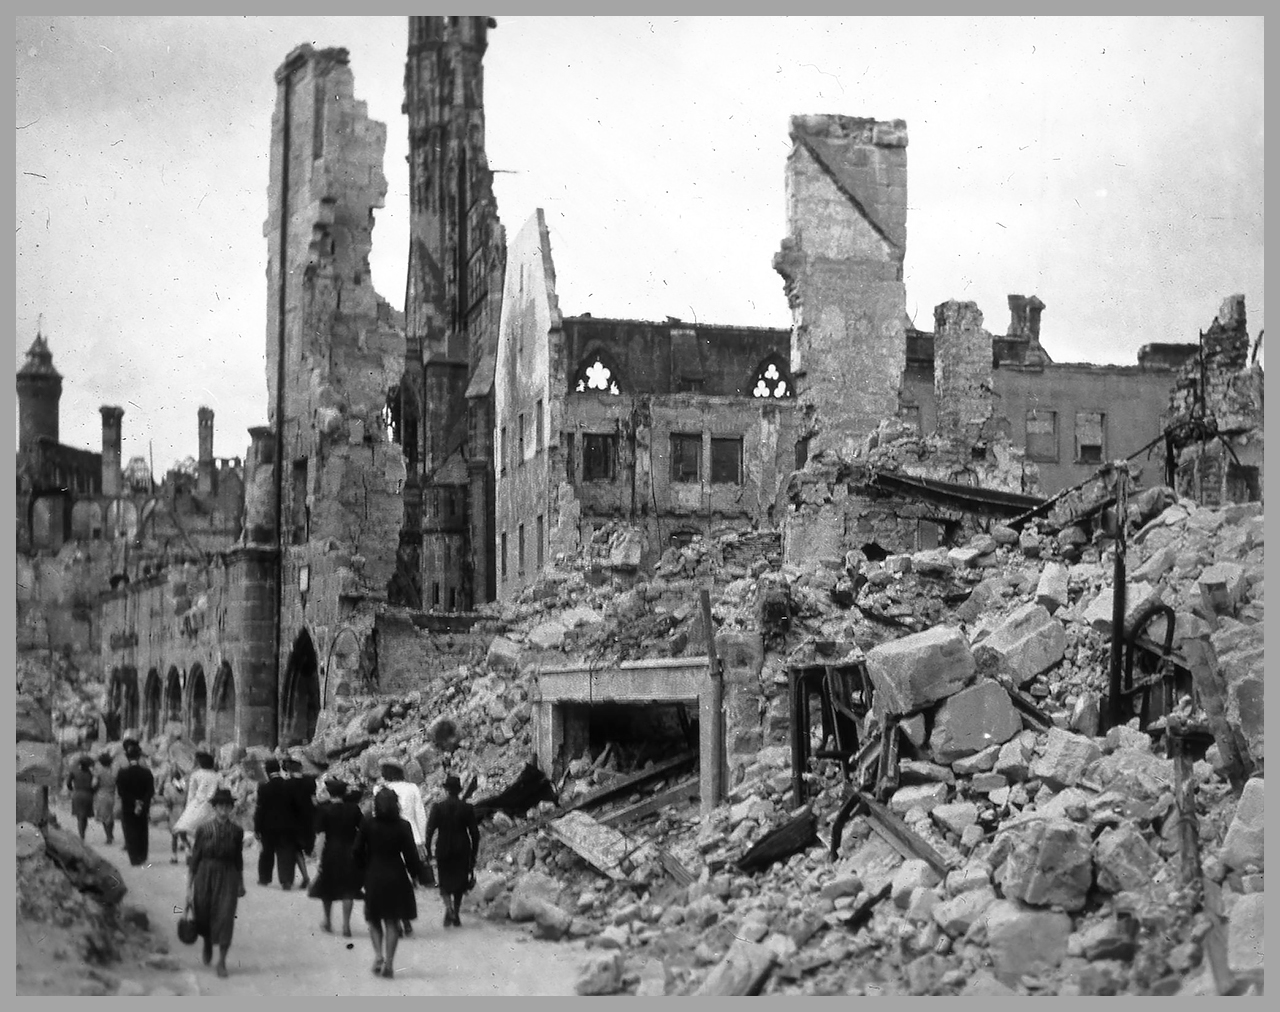 1280x1012px-Bombed_building_in_Germany,_post-WWII-vWA24